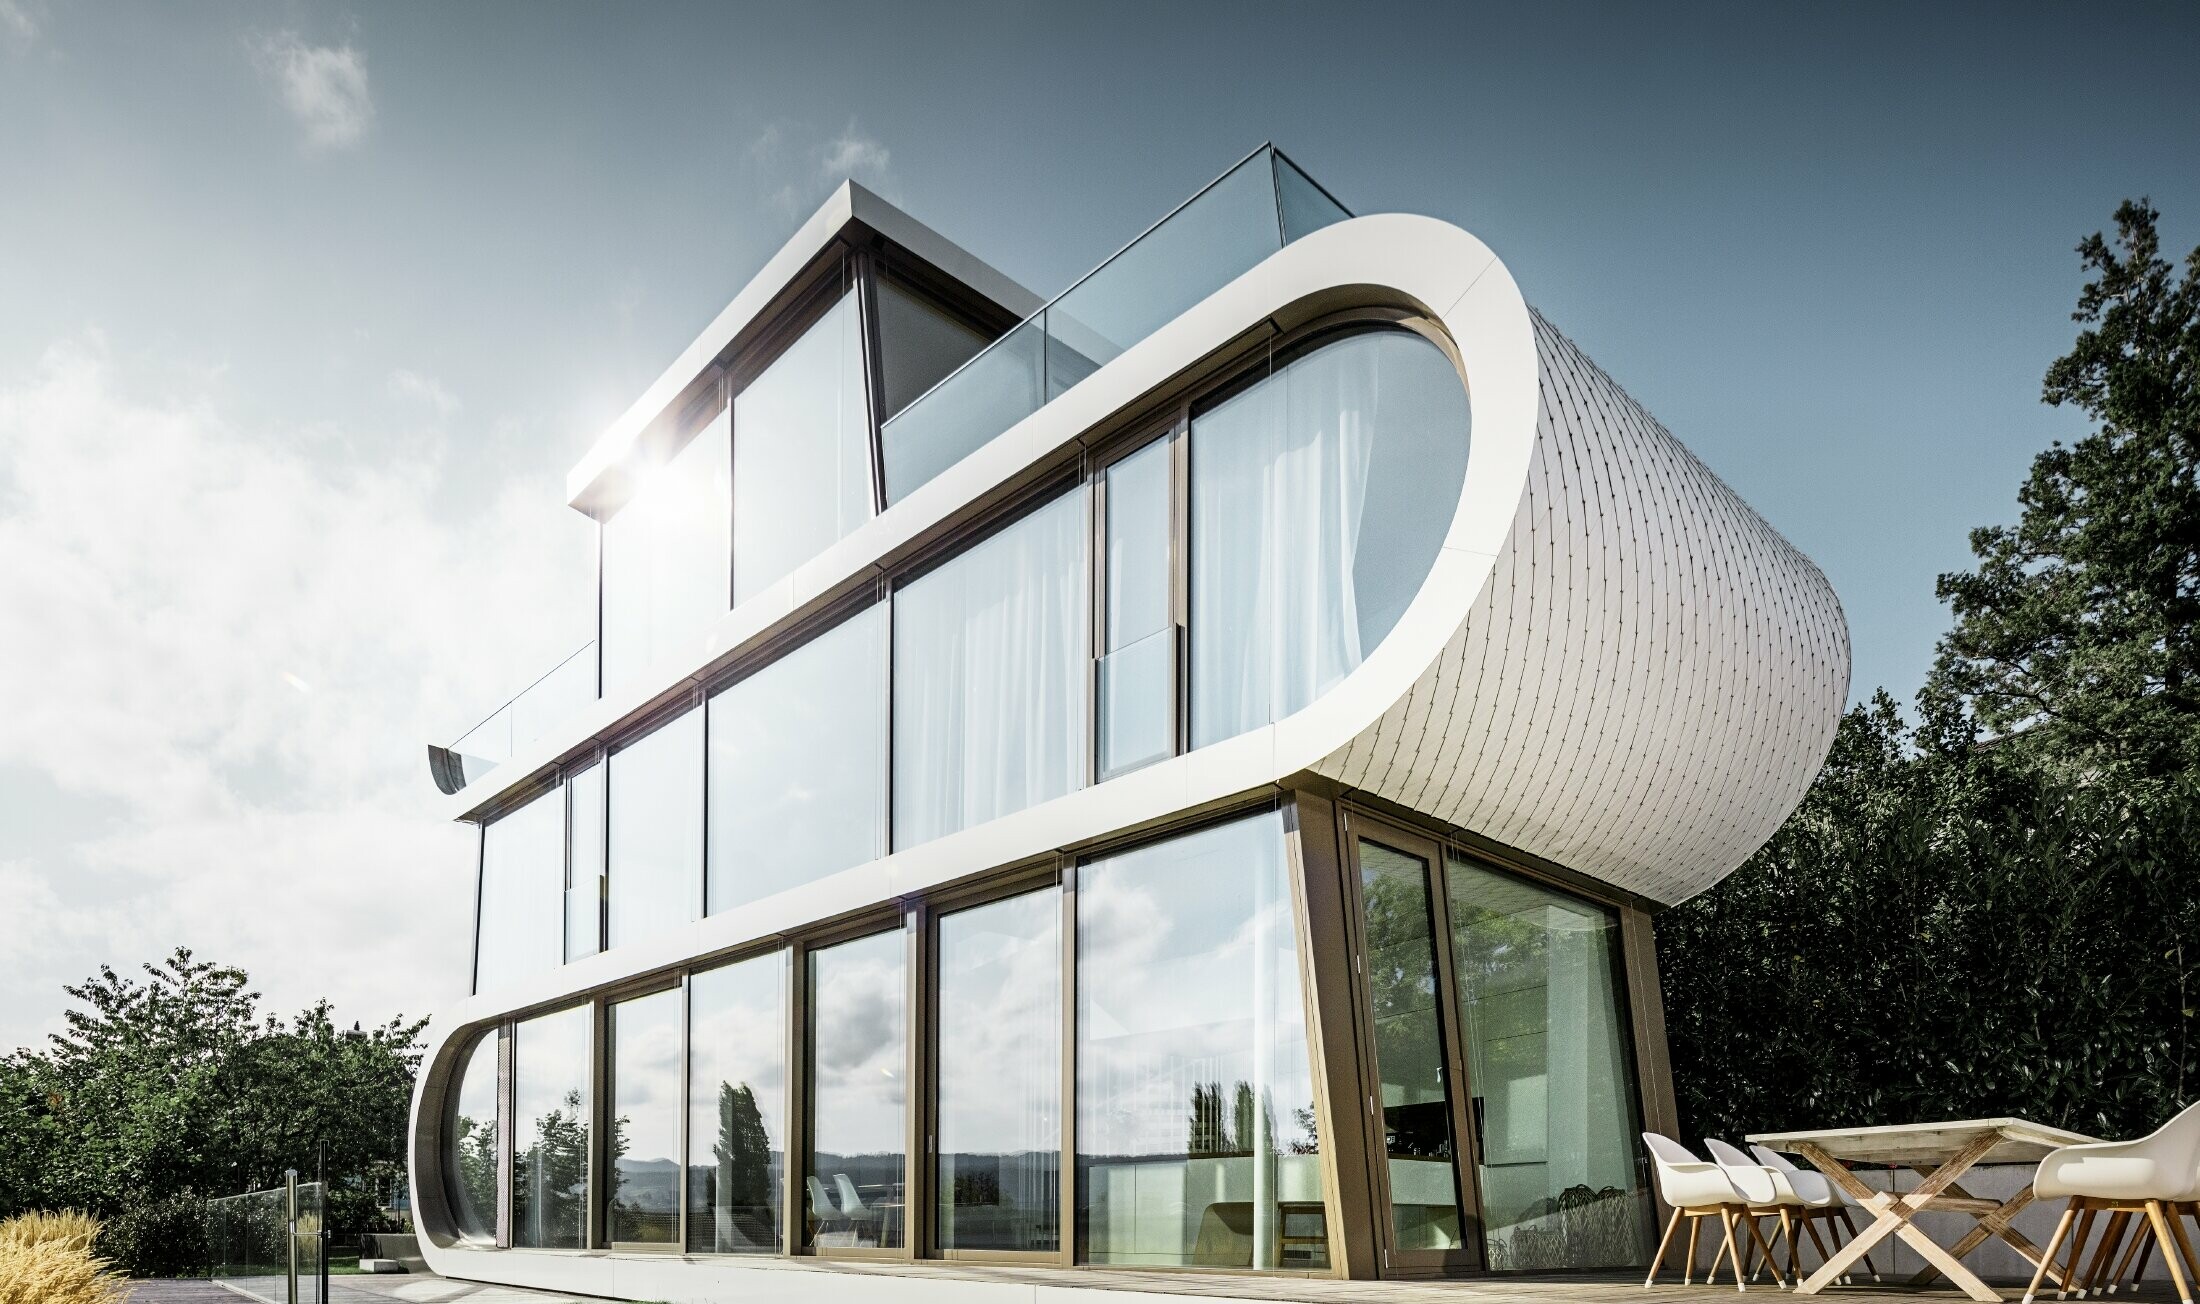 Modern detached house designed by the architect Camenzind. A curved truss connects the levels – on the outsides, the curve is clad in the easy to install PREFA small rhomboid roof tiles in pure white.